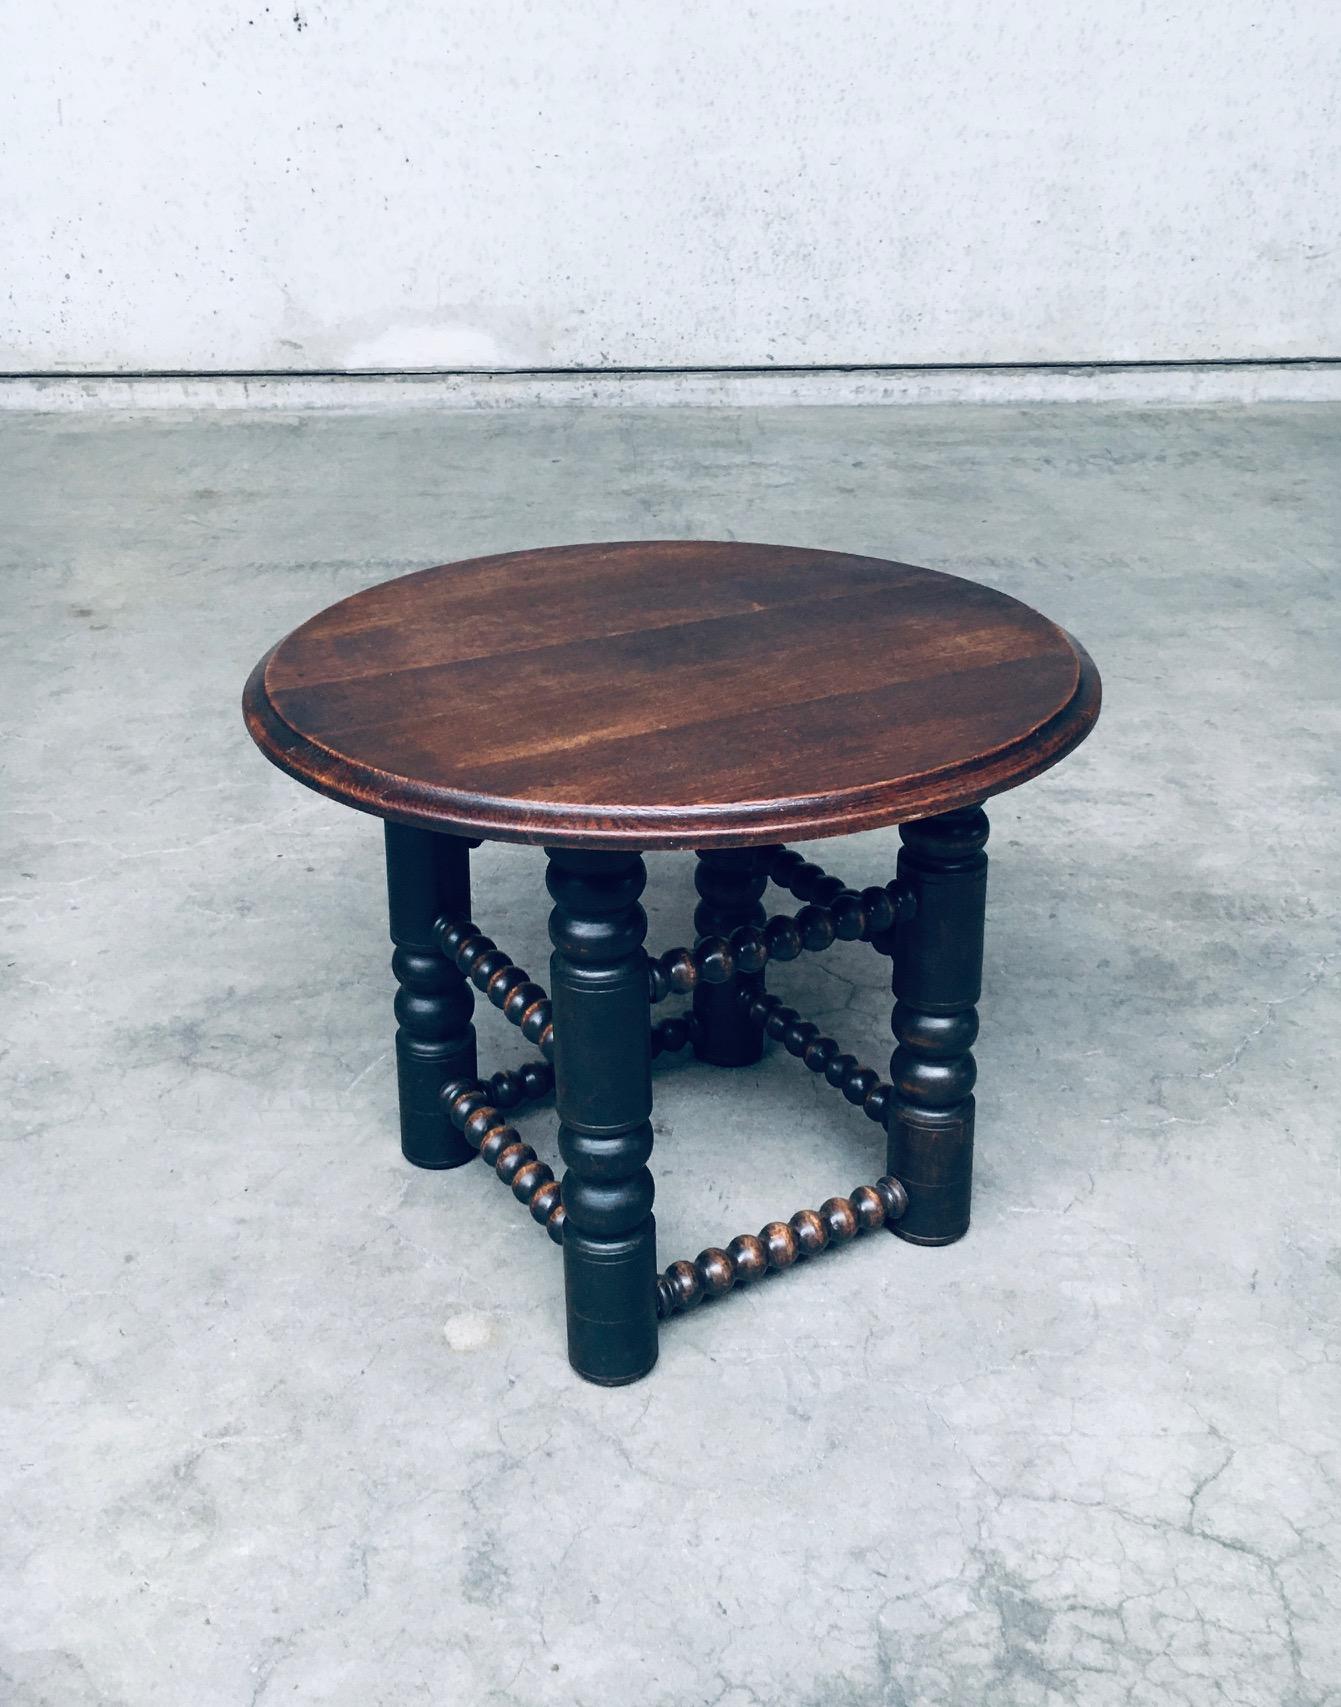 Vintage French Rare Arts & Crafts Modernist Design Side Table by Charles Dudouyt. Made in France, 1930's period. Dark stained elm wood constructed small round side table. 4 turned legs with bobbin turned cross spindles. Well executed and designed